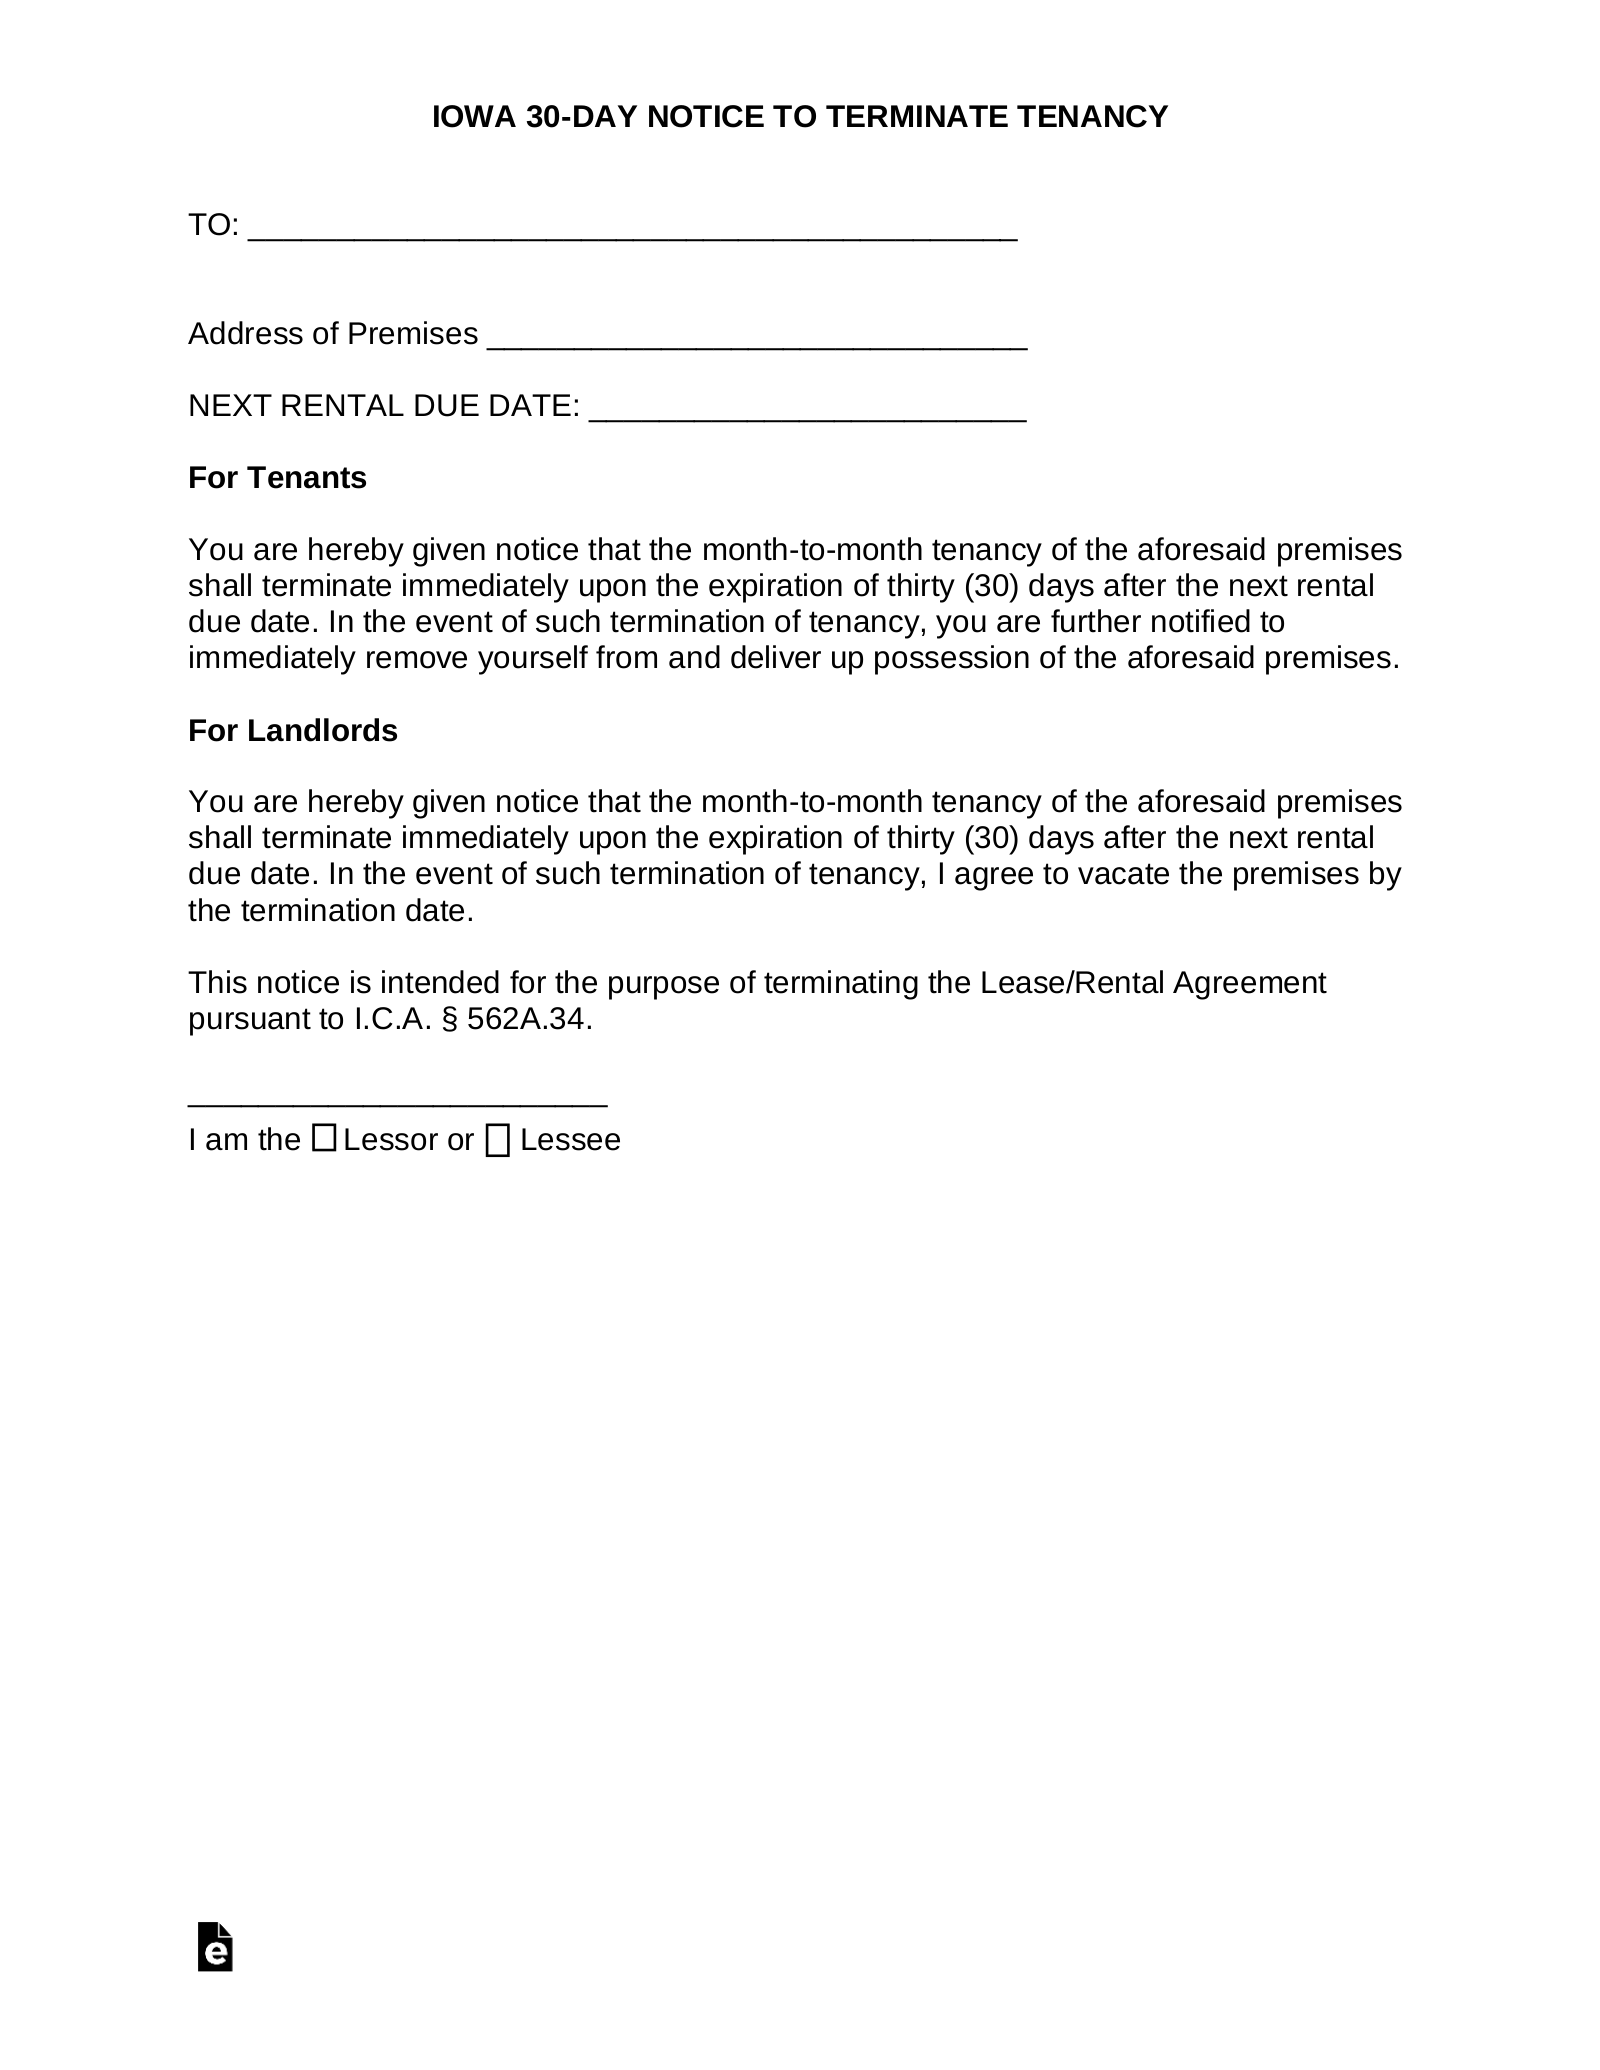 Breaking Lease Letter Template from eforms.com